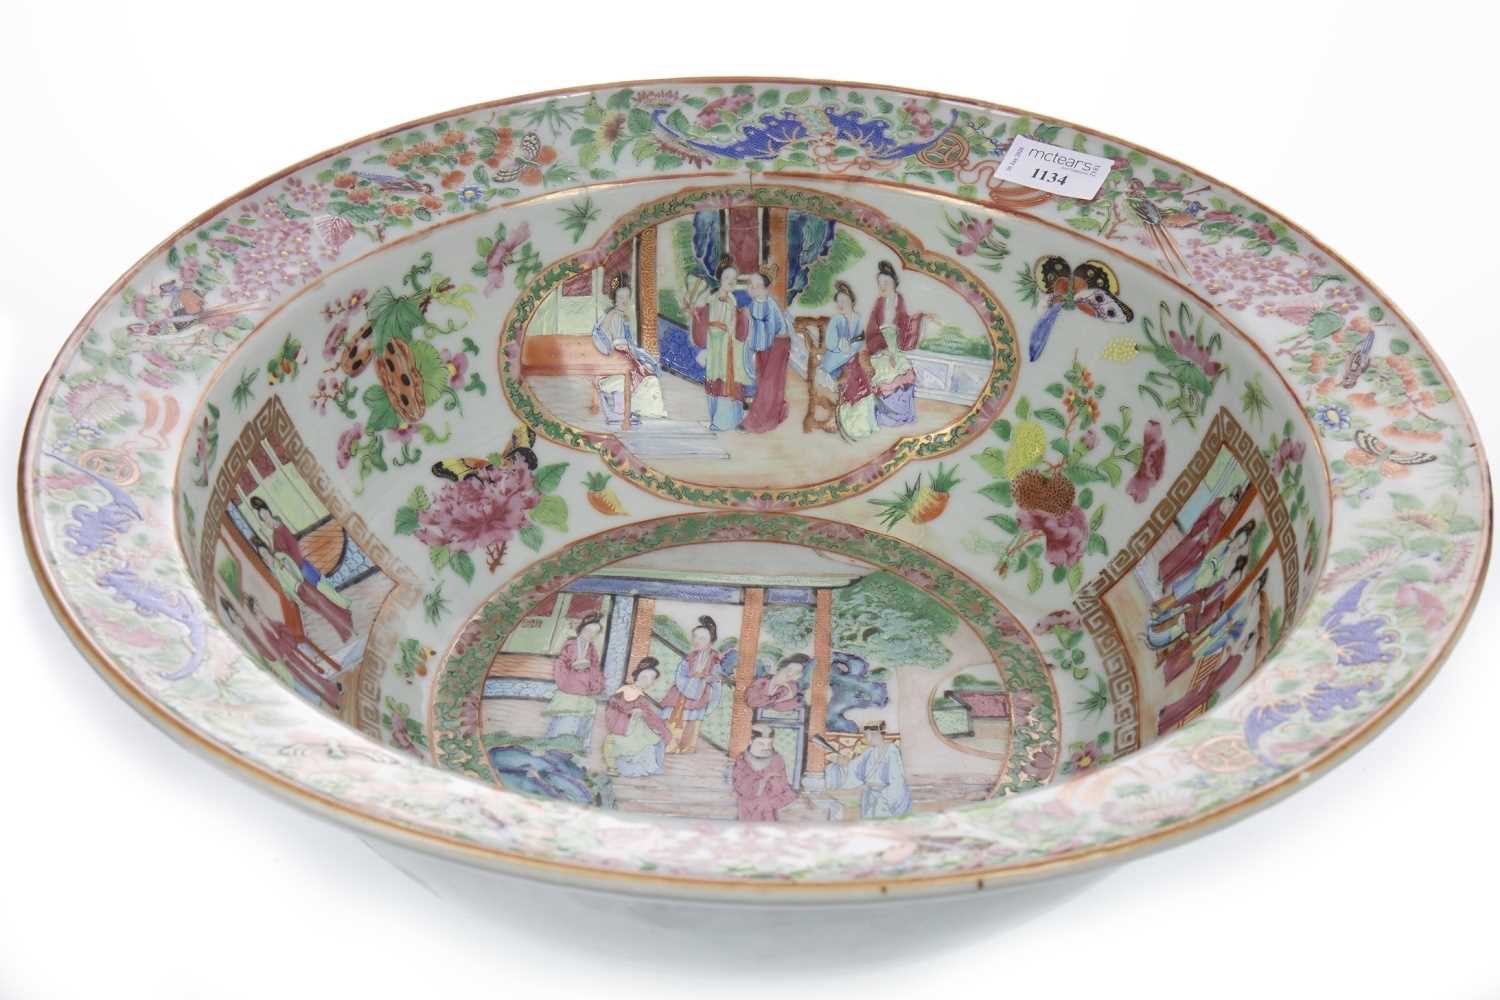 Lot 1134 - A LATE 19TH/EARLY 20TH CENTURY CHINESE FAMILLE ROSE BOWL